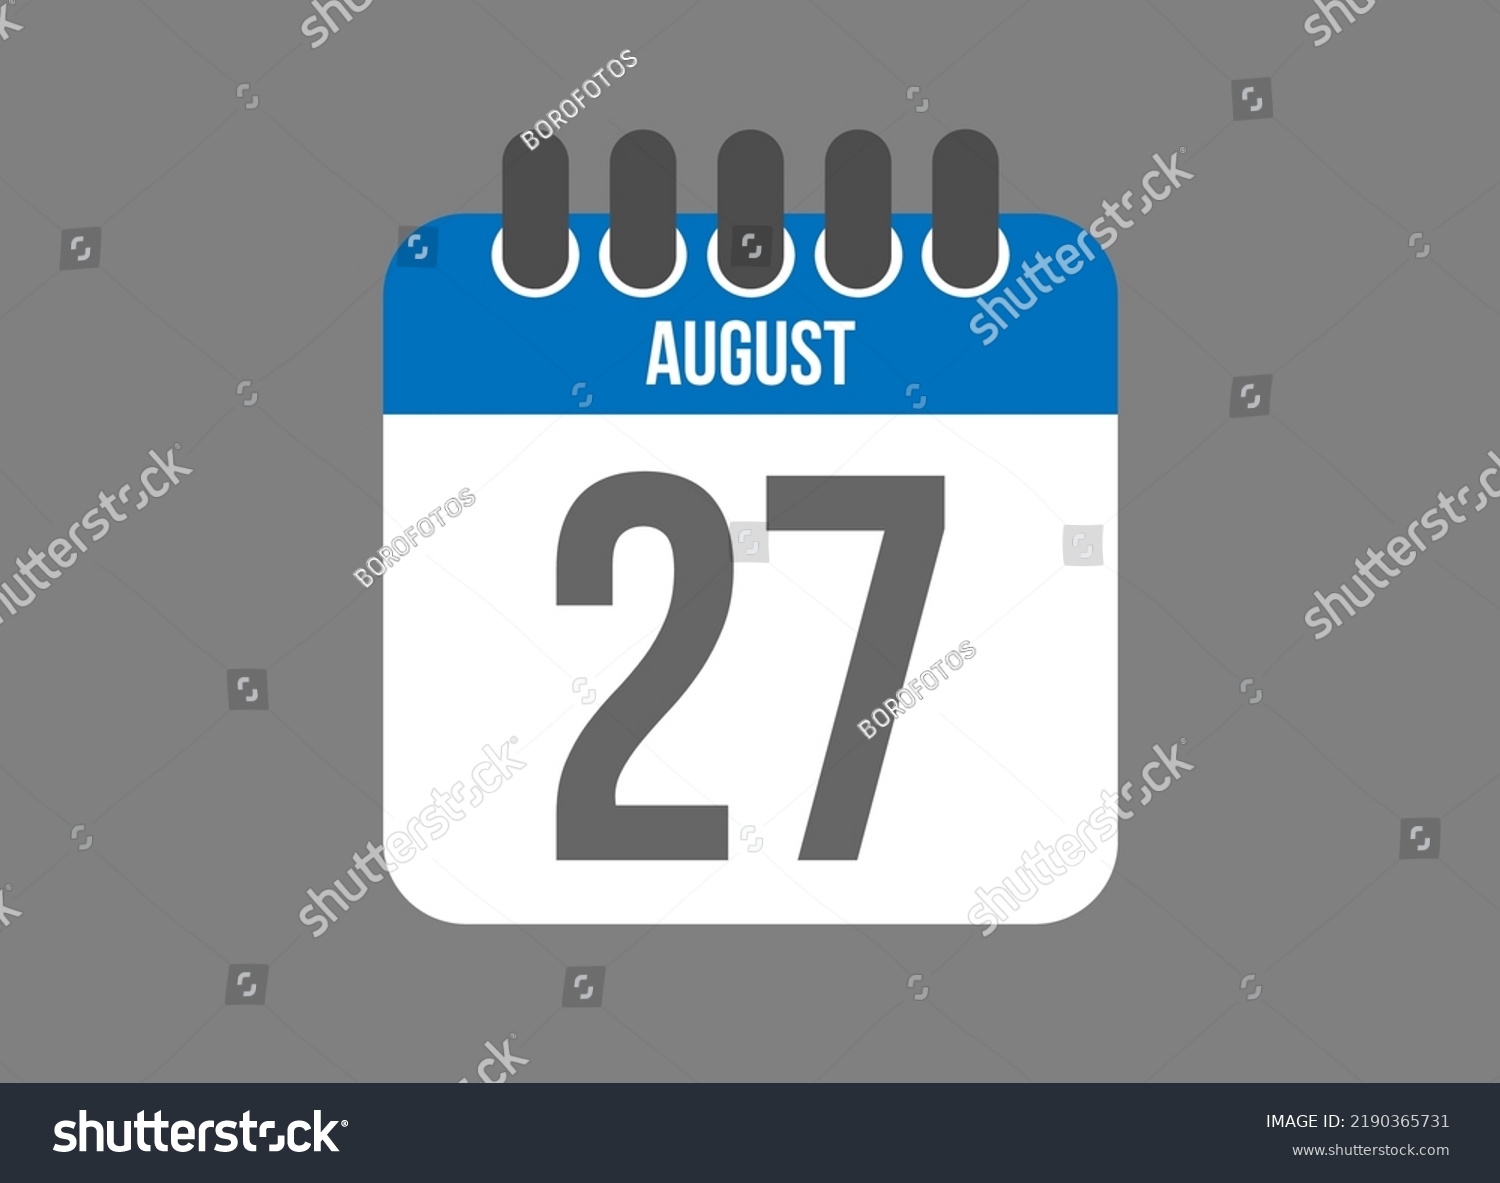 SVG of 27 calendar august. Calendar icon for August days in blue color on dark background. svg